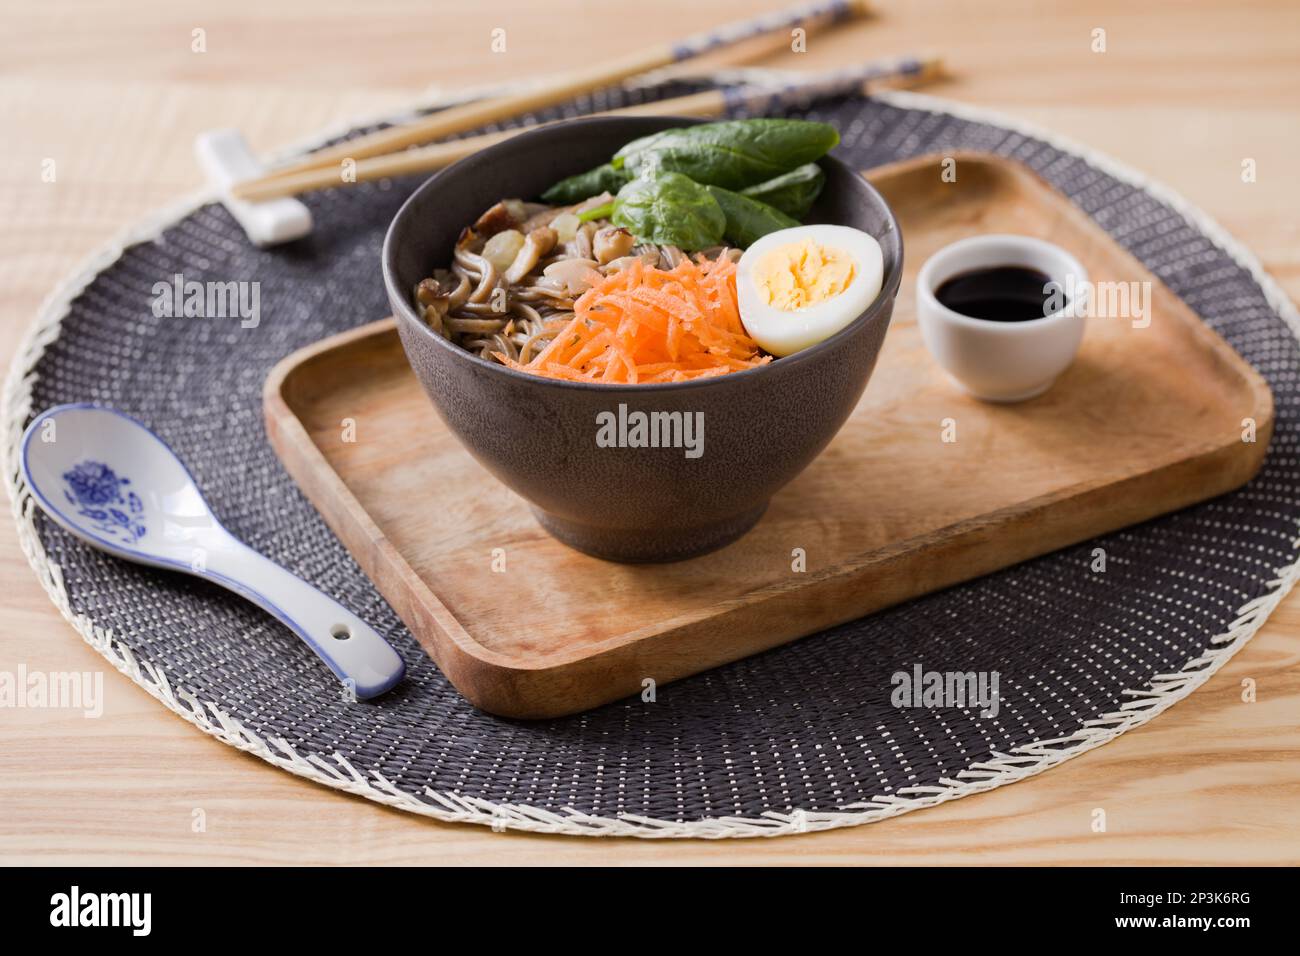 Shiitake mushrooms and soba noodle soup with carrot, spinach, boiled quail egg, and soy sauce on a wooden tray Stock Photo